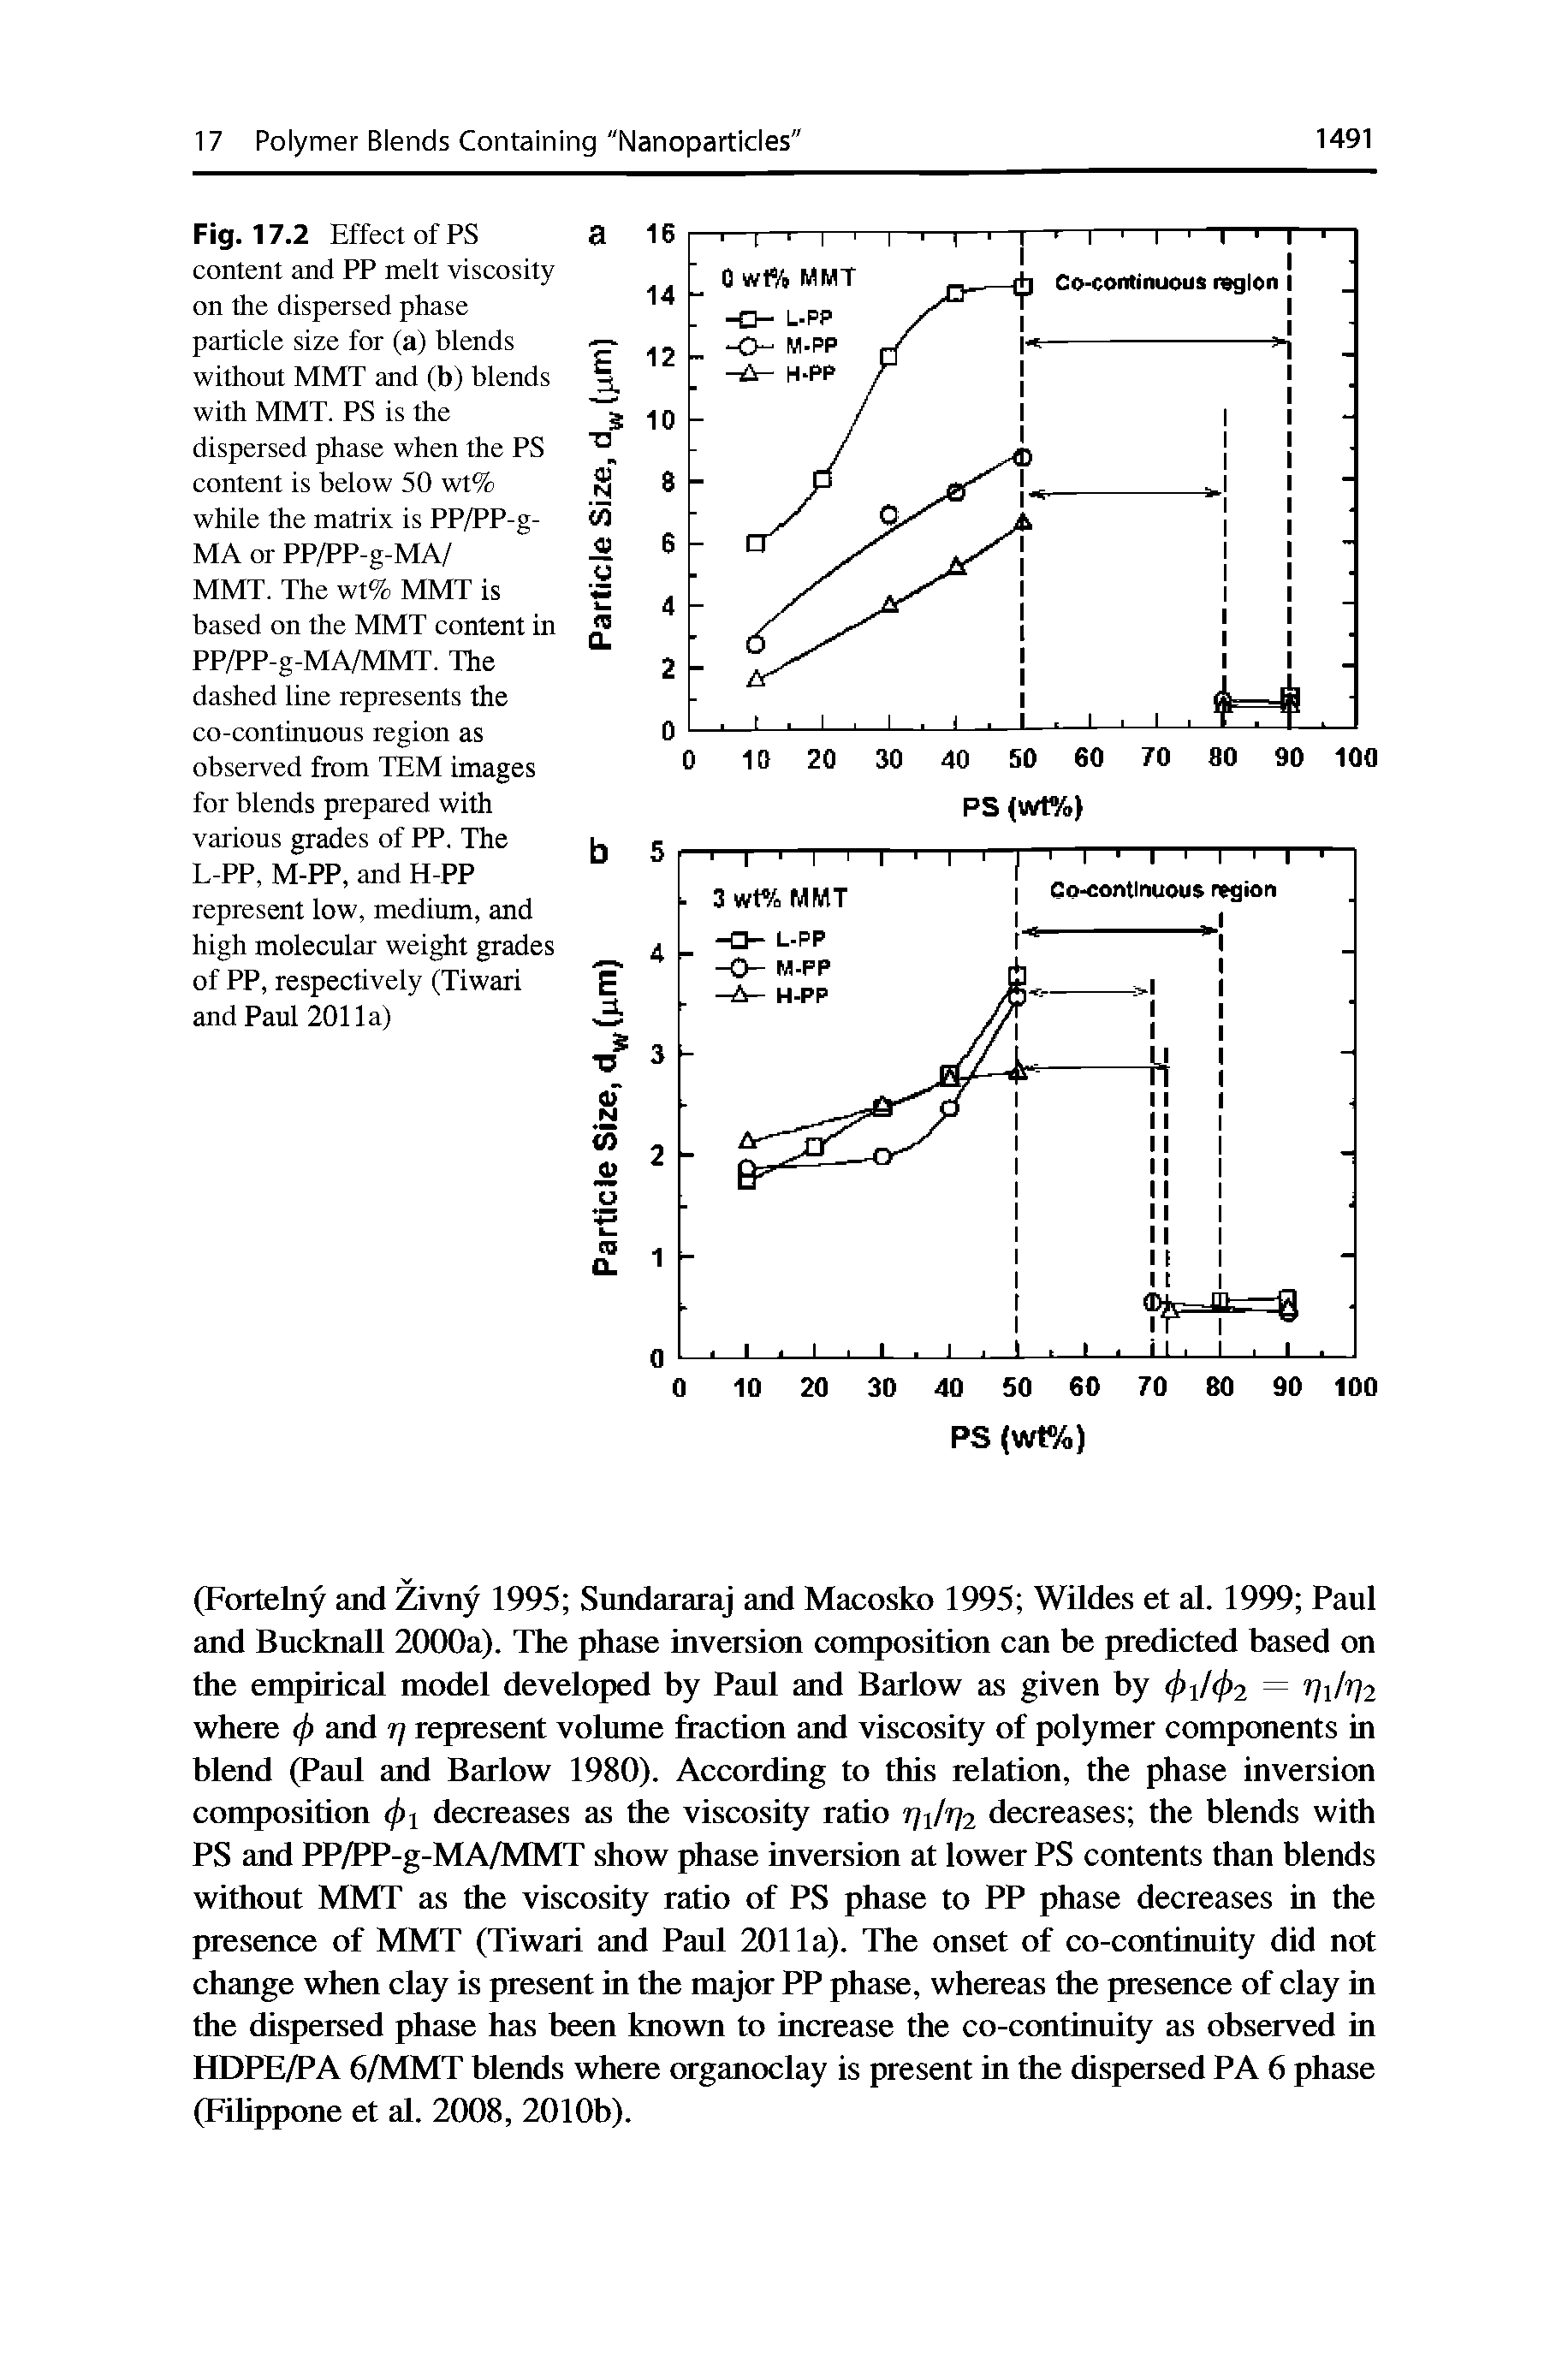 Fig. 17.2 Effect of PS content and PP melt viscosity on the dispersed phase particle size for (a) blends without MMT and (b) blends with MMT. PS is the dispersed phase when the PS content is below 50 wt% while the matrix is PP/PP-g-MA or PP/PP-g-MA/...